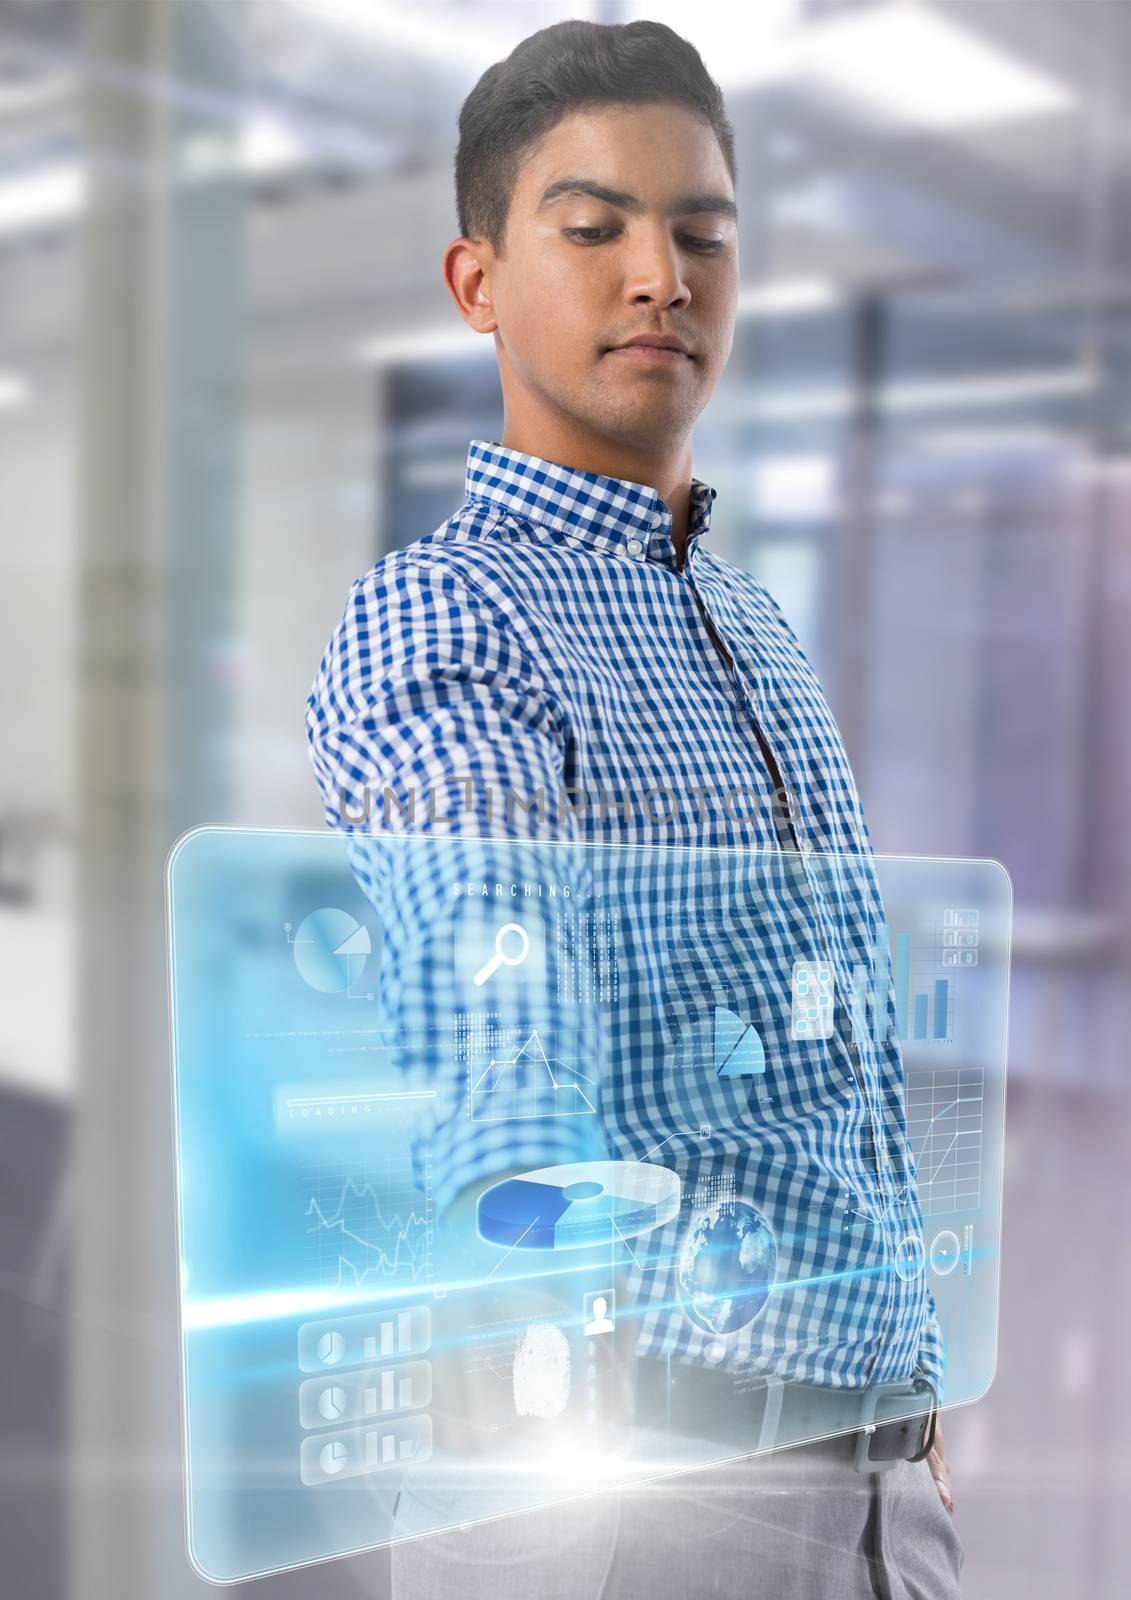 Technology interface and Businessman touching air in front of office by Wavebreakmedia